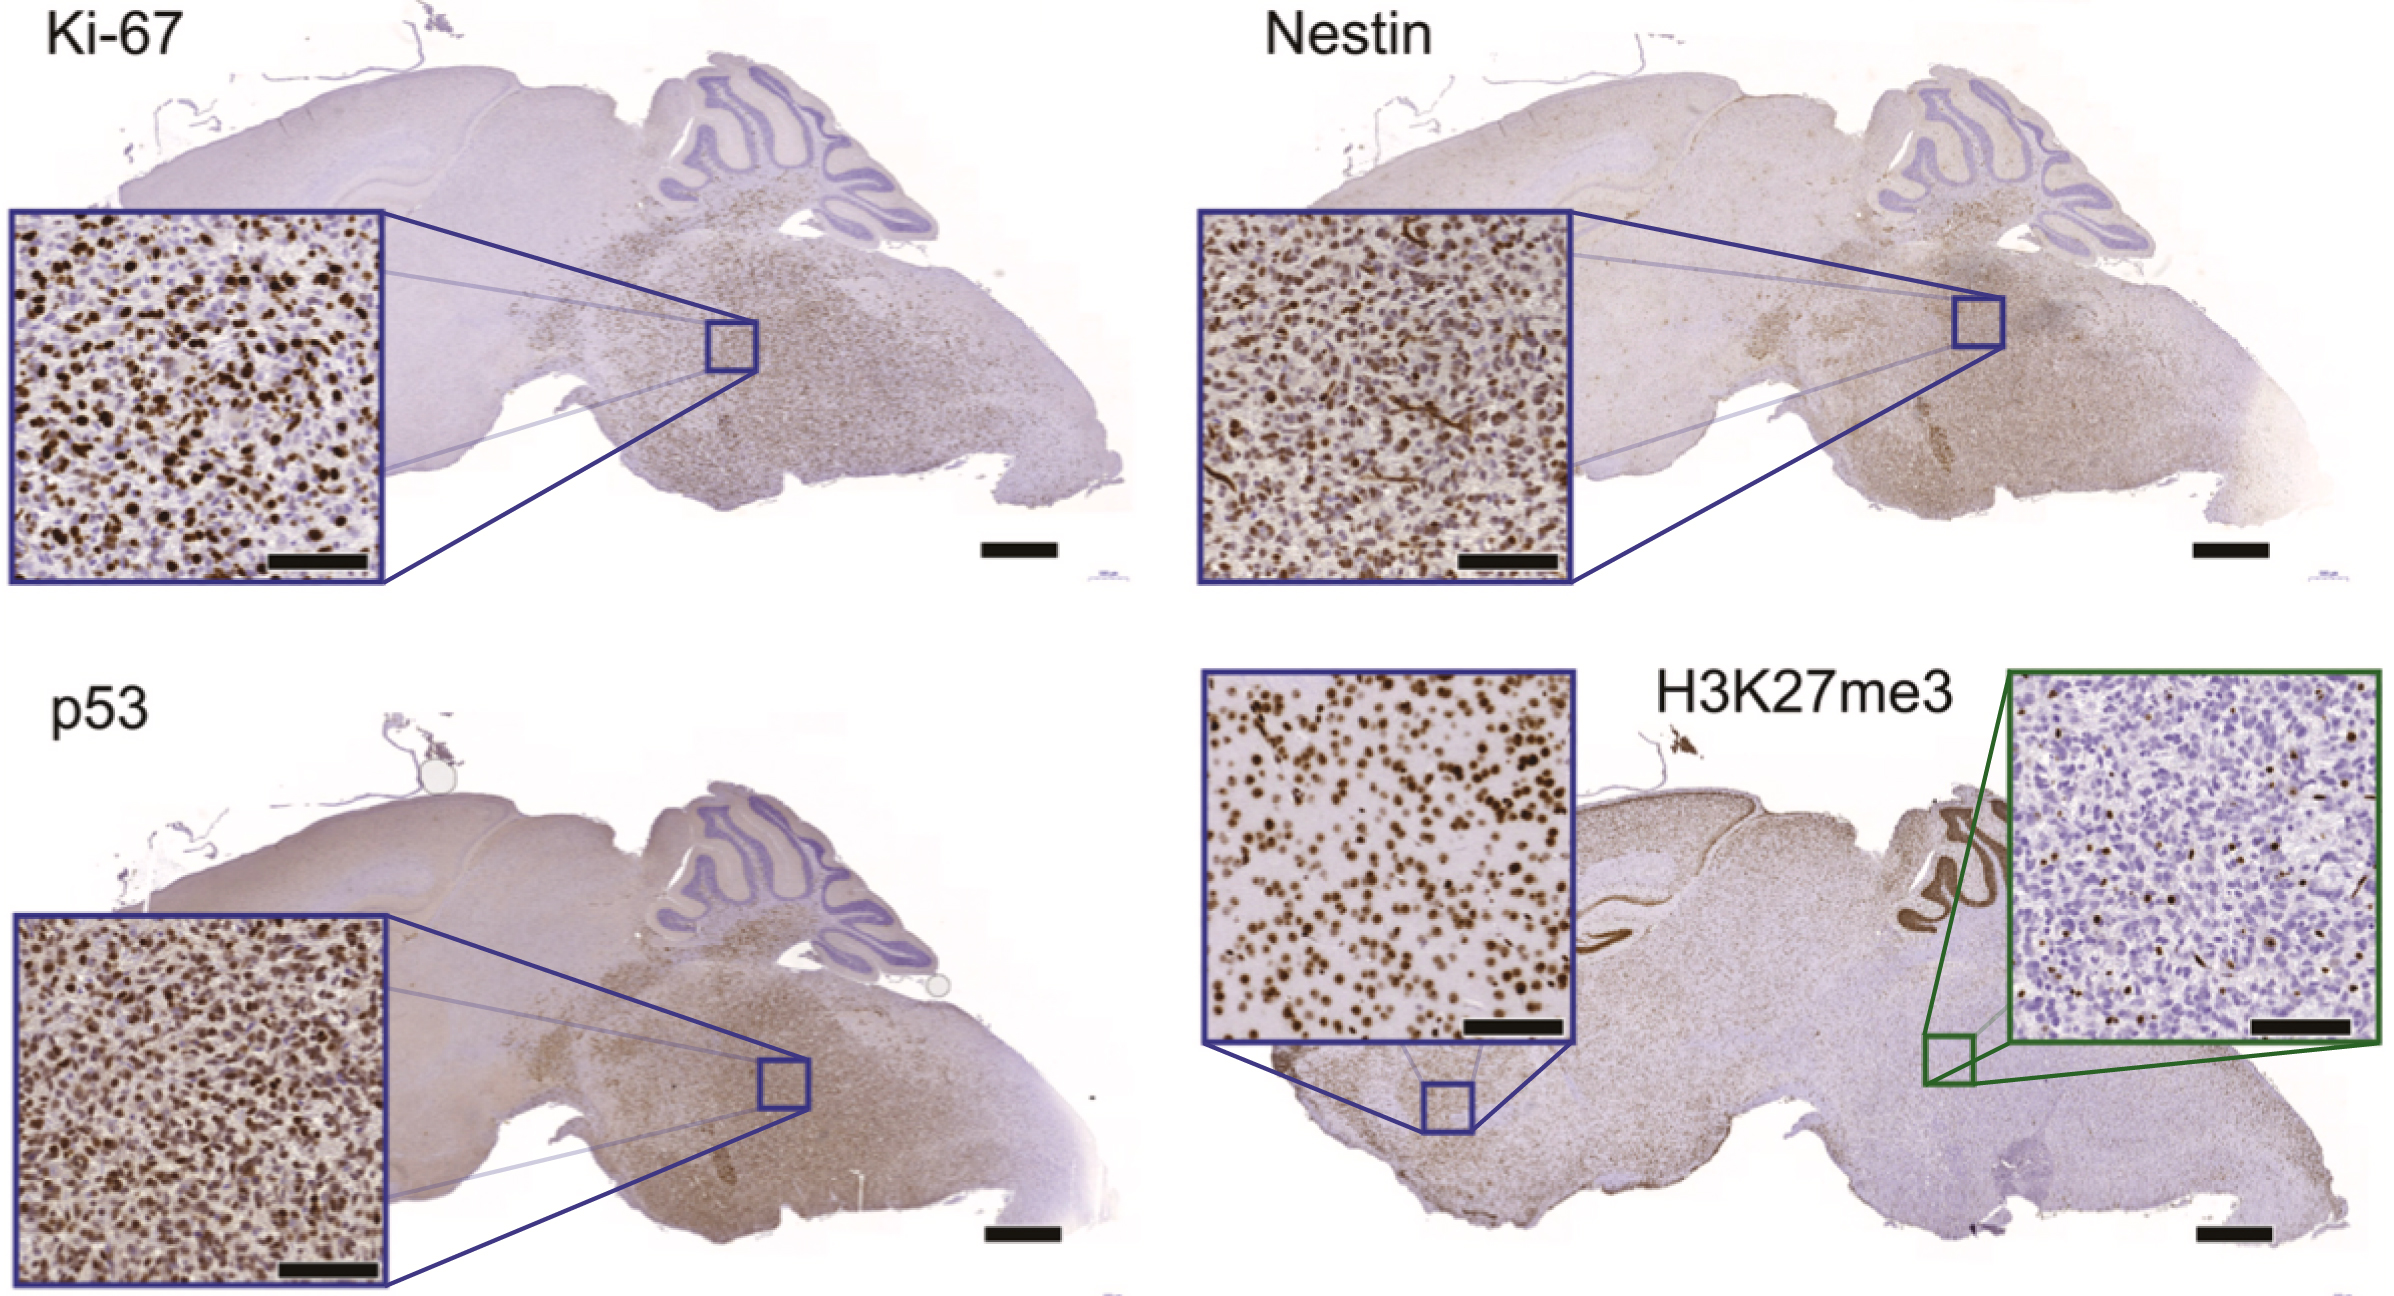 Image of four mouse brains (sagittal sections) with magnified areas of cells showing the expression of four molecular markers (Ki-67, Nestin, p53, H3K27me3).